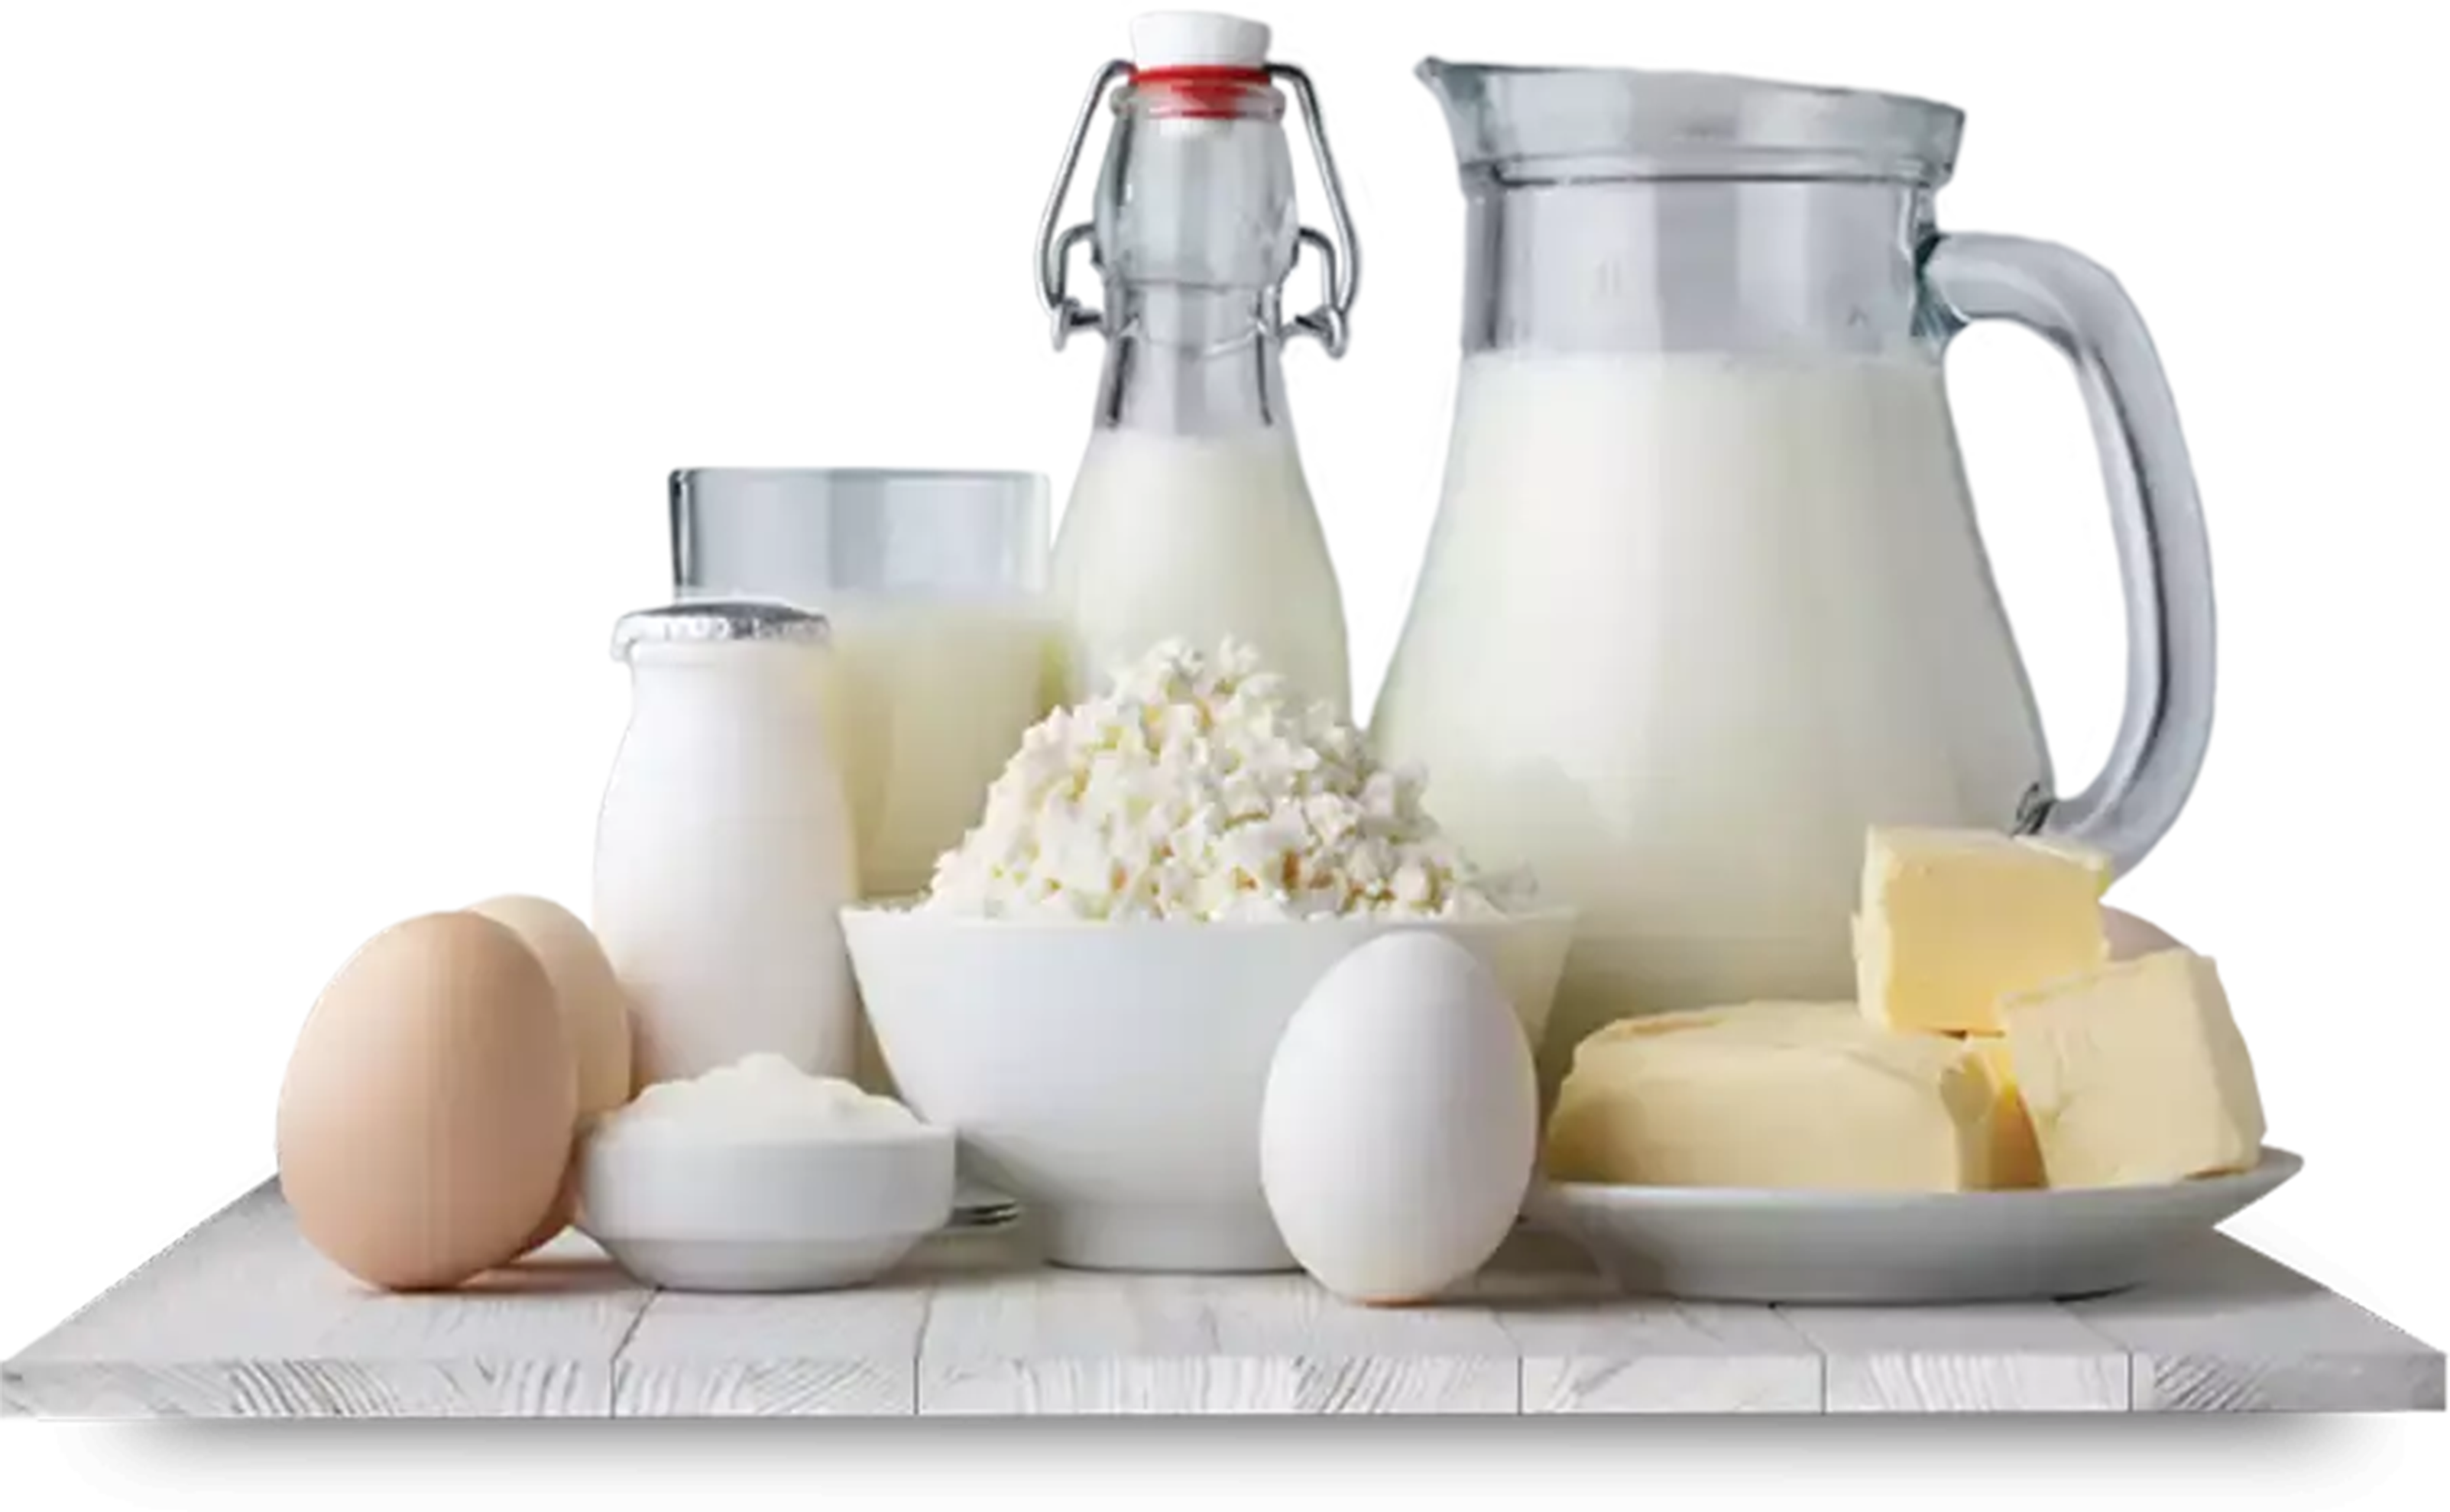 Dairy Products consultants